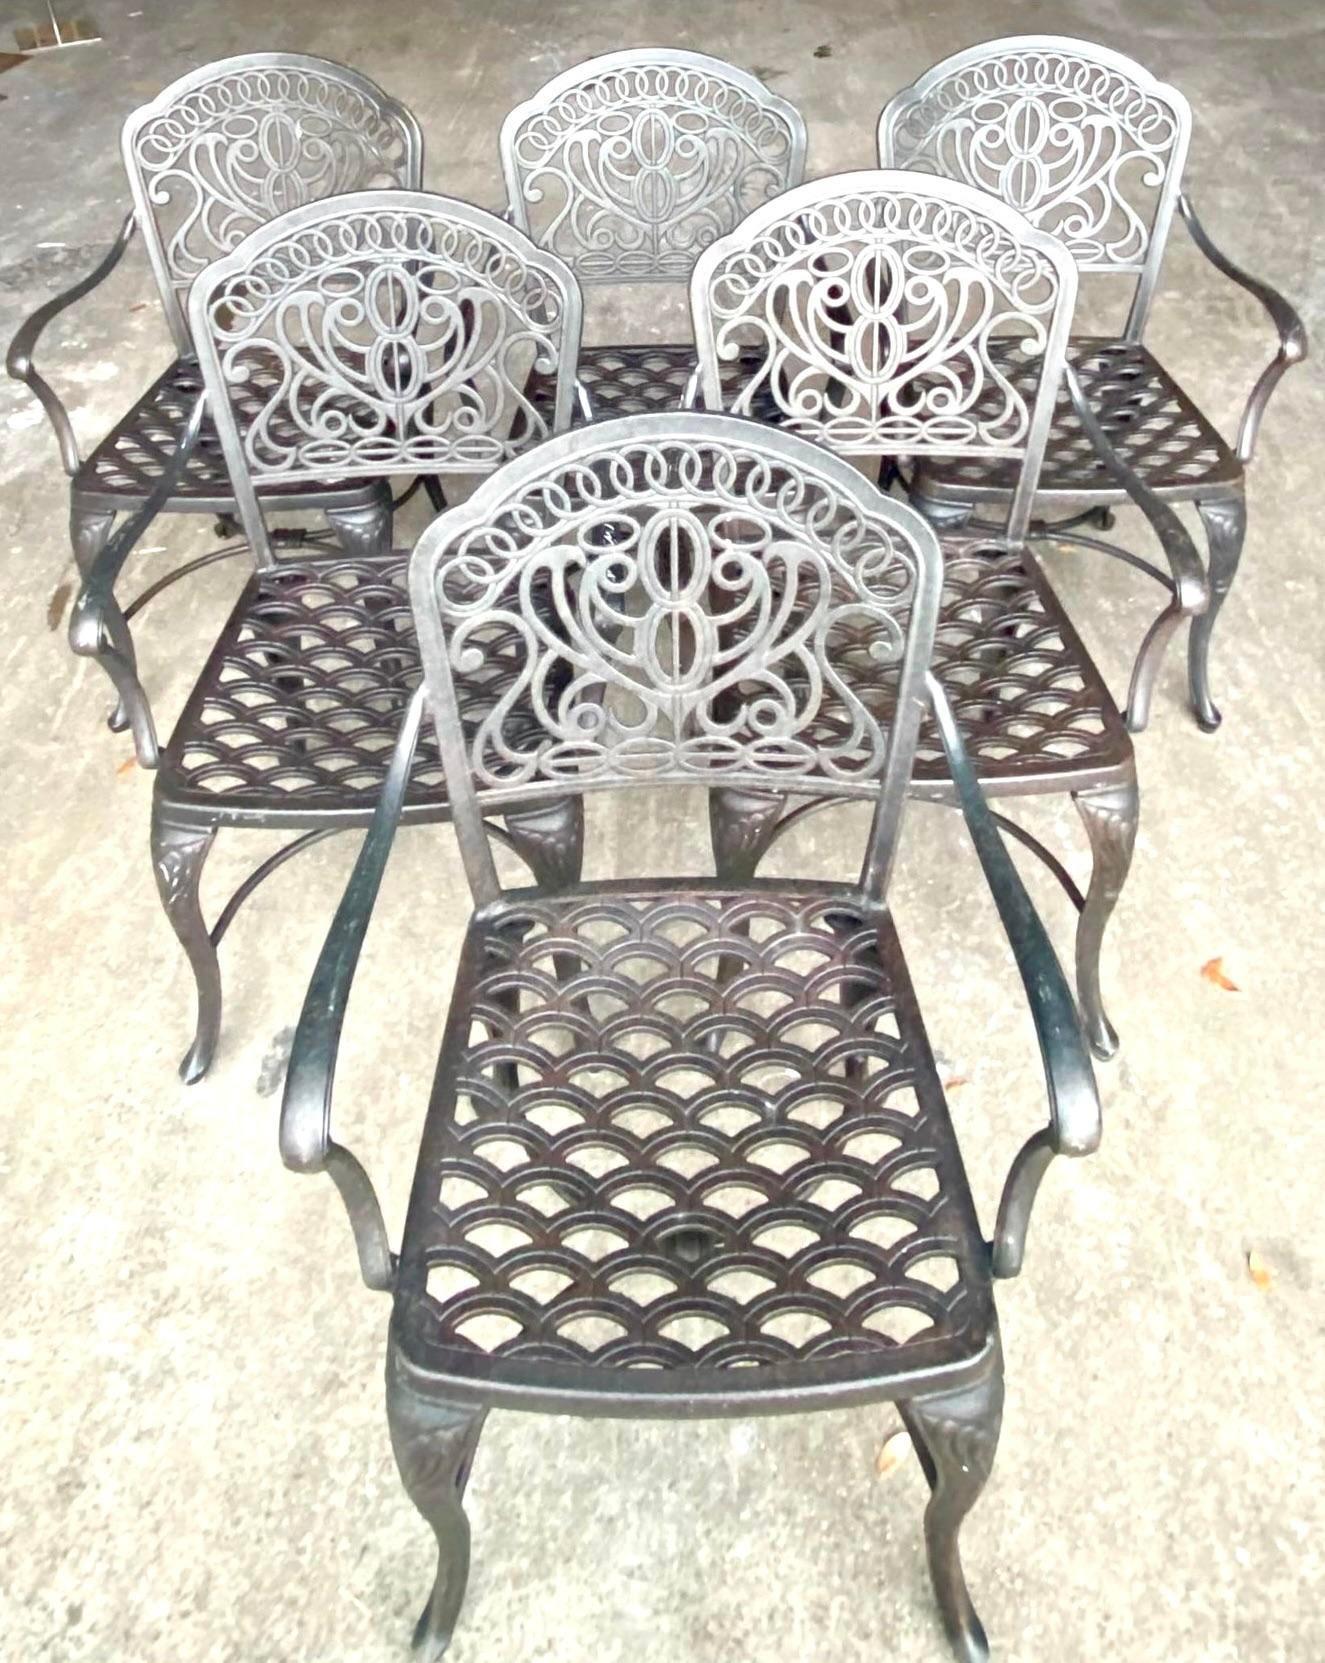 20th Century Vintage Coastal Hanamint Cast Aluminum Outdoor Dining Chairs - Set of 6 For Sale